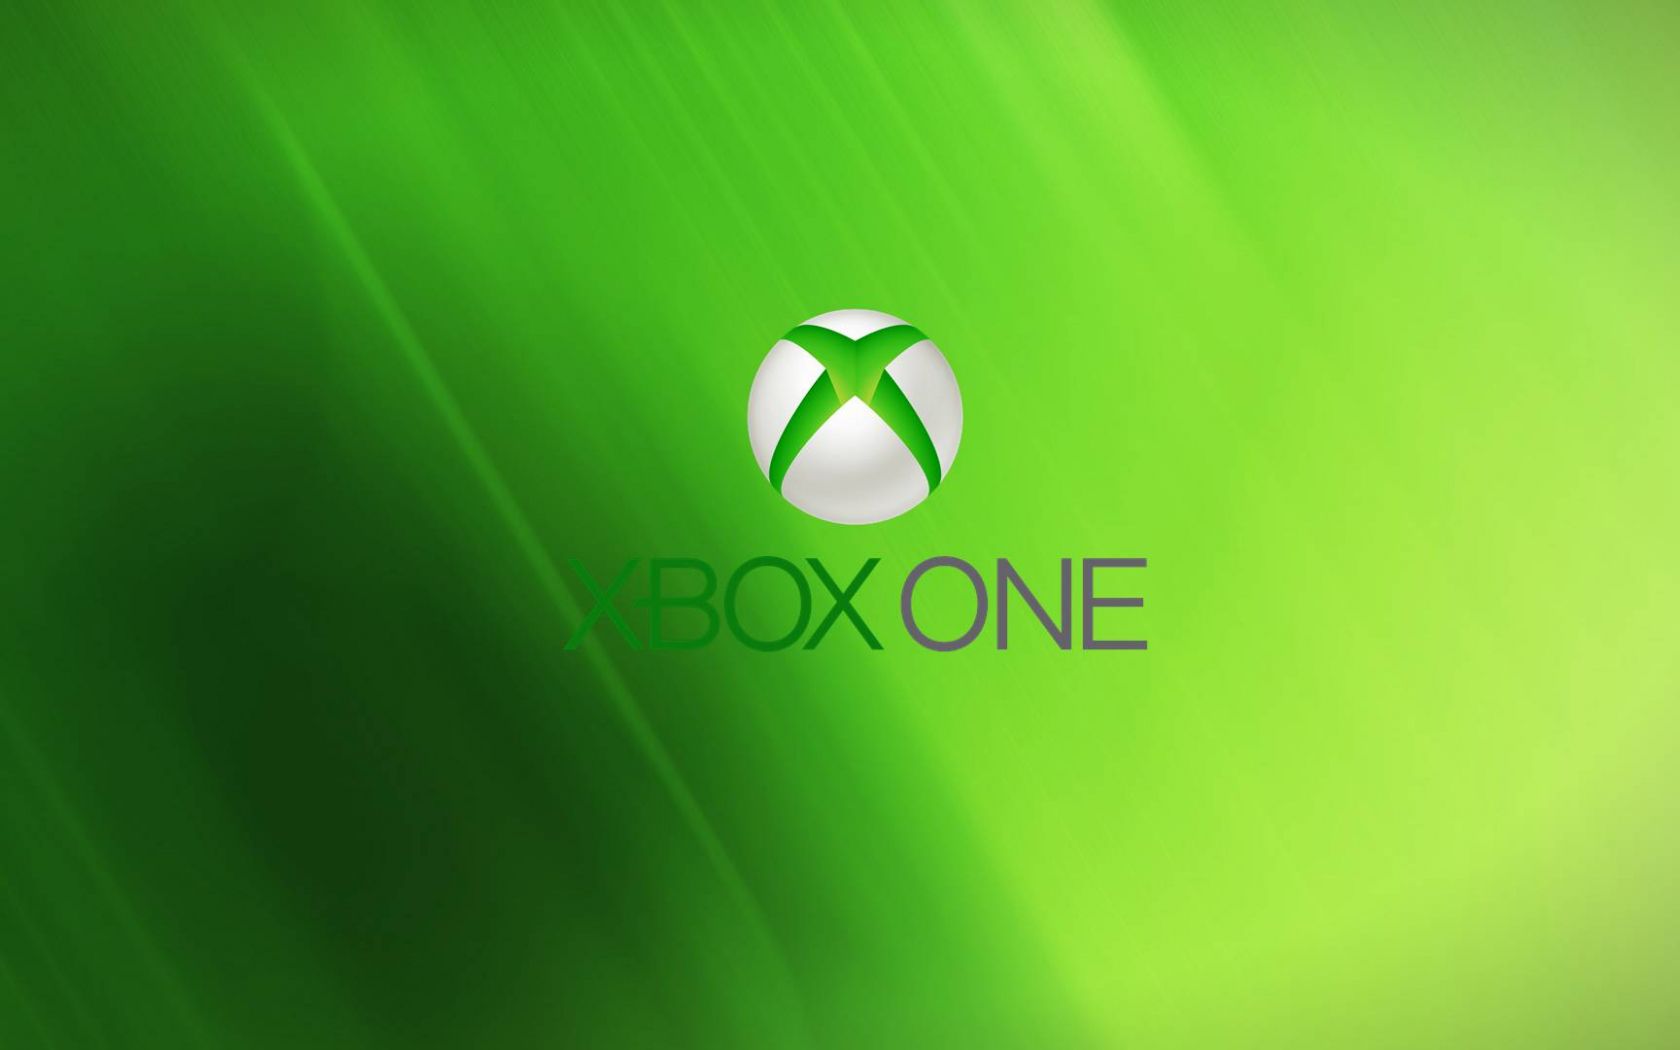 Free download wallpaper xbox one microsoft console Xbox Live Wallpaper [1920x1080] for your Desktop, Mobile & Tablet. Explore Live Wallpaper for Xbox One. Xbox Wallpaper, Wallpaper for Xbox One